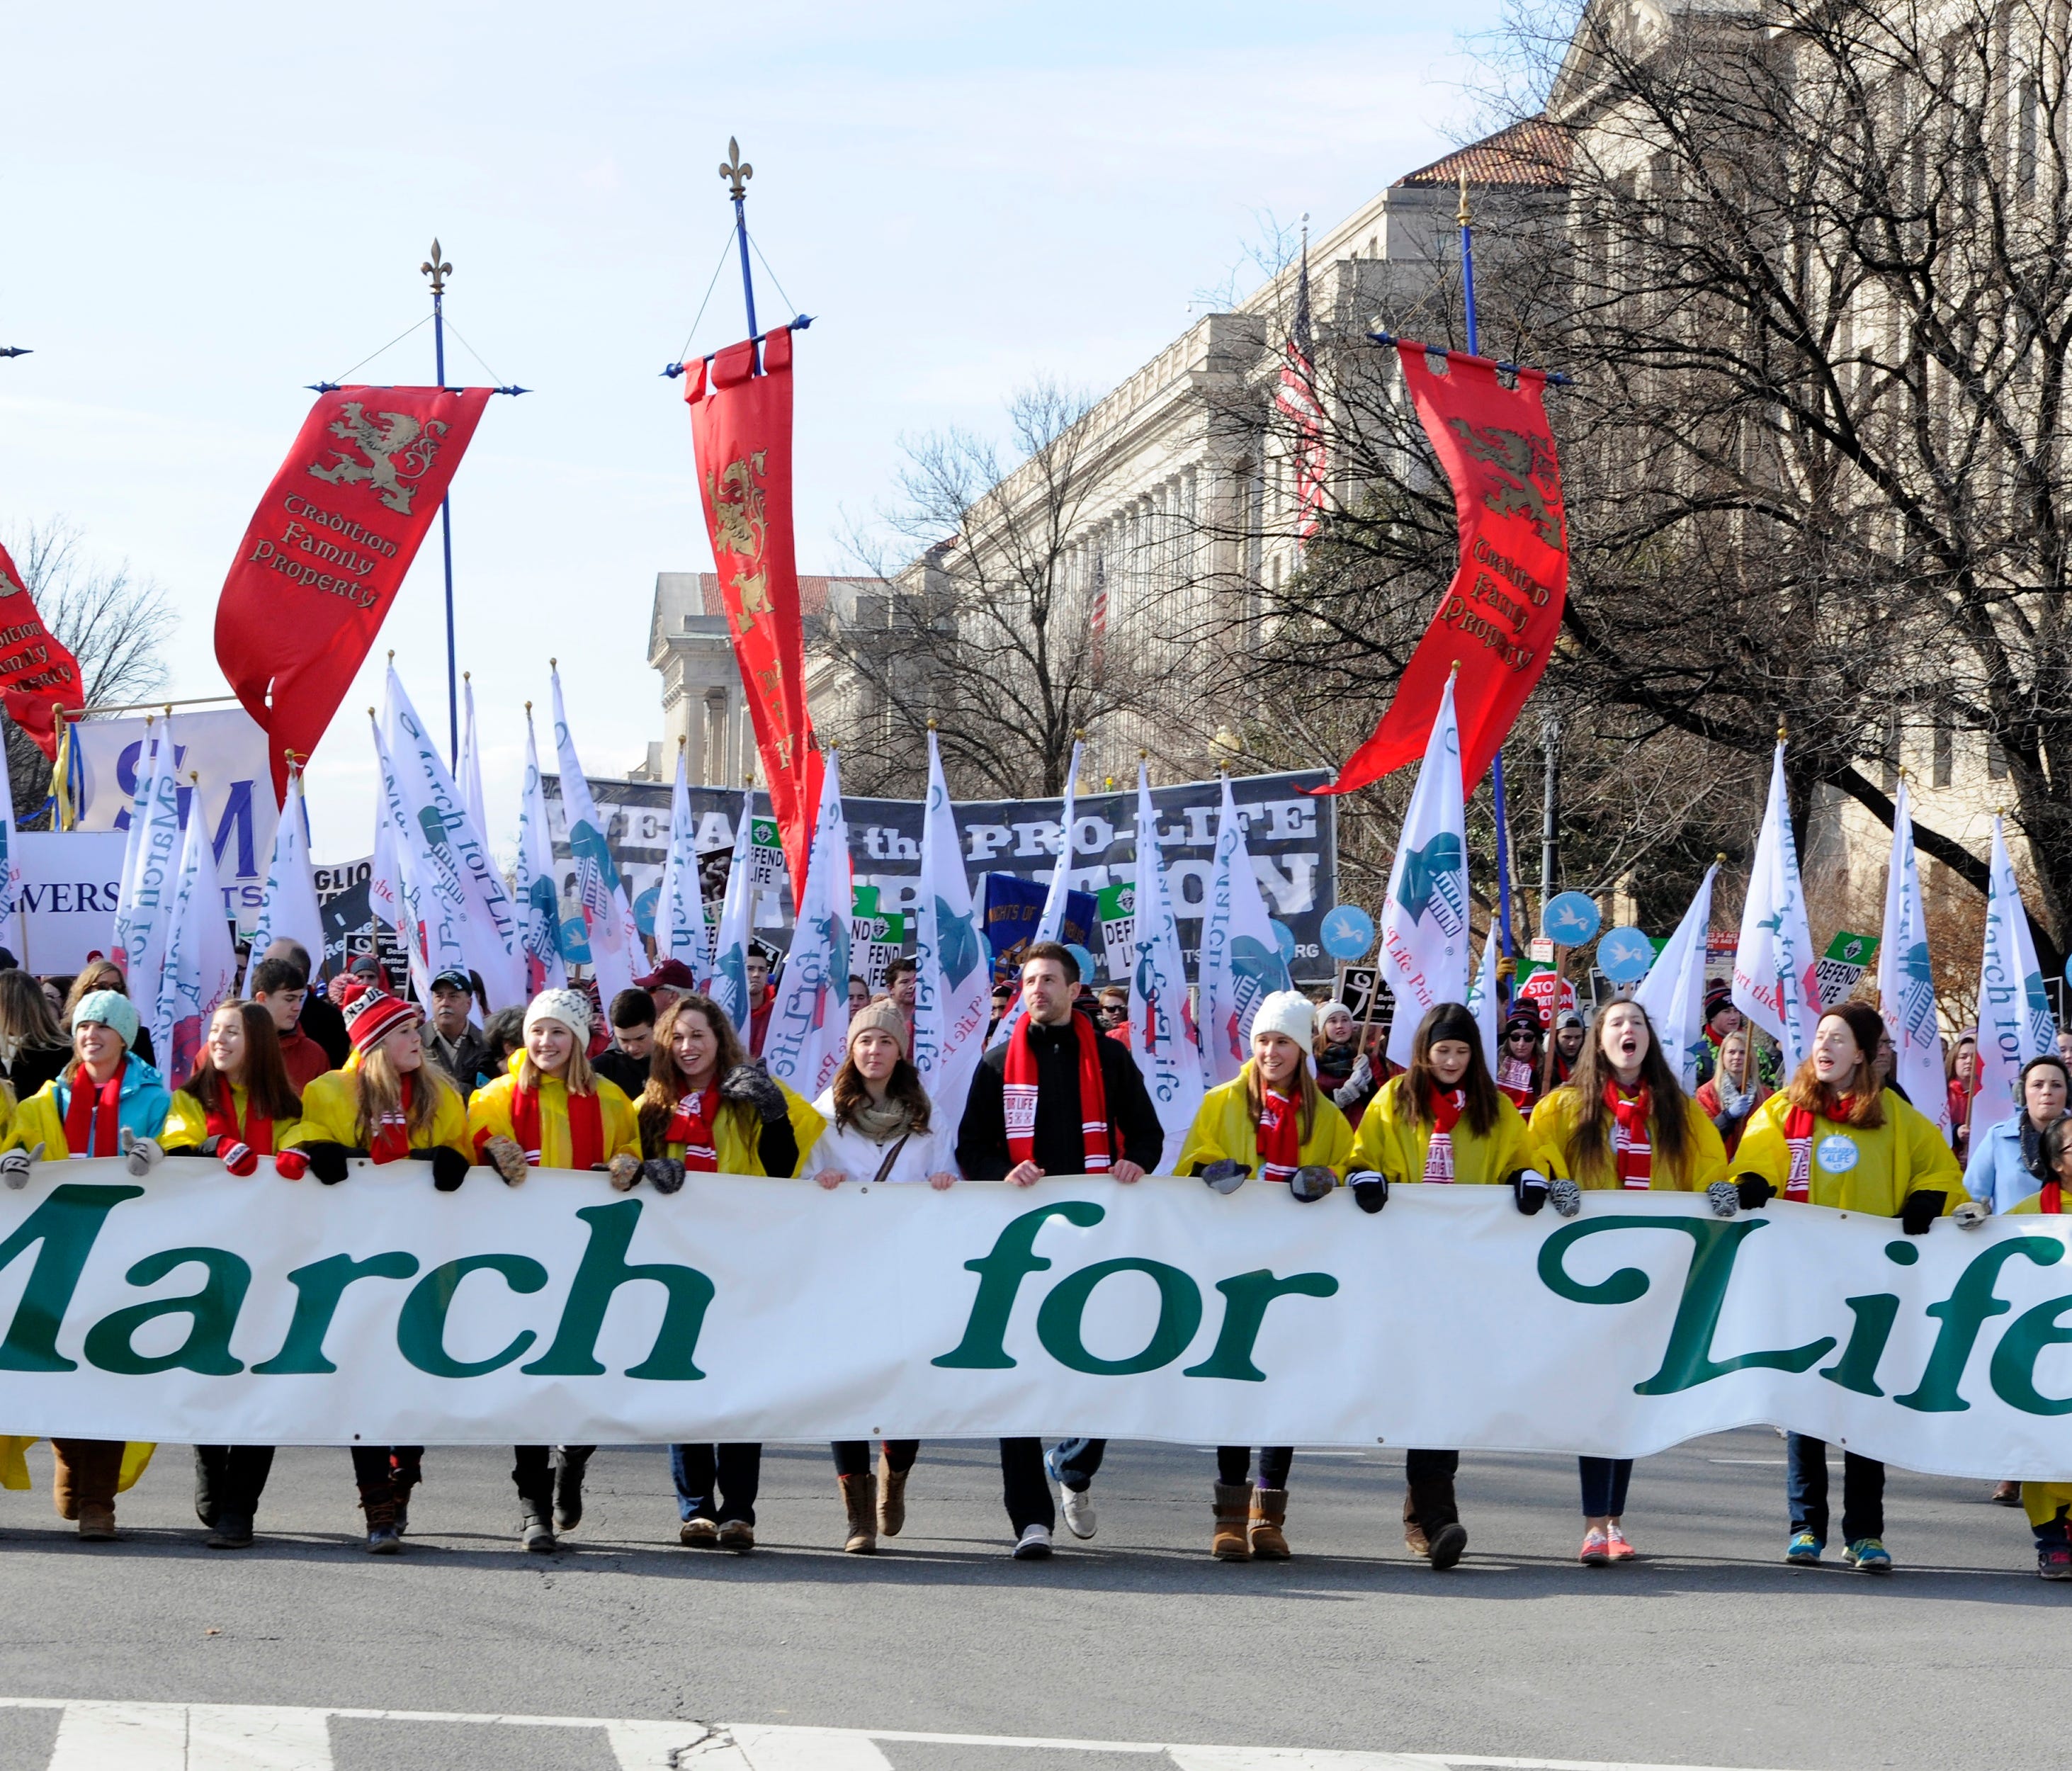 Anti-abortion protesters march in the annual March for Life in Washington, D.C, in 2015.